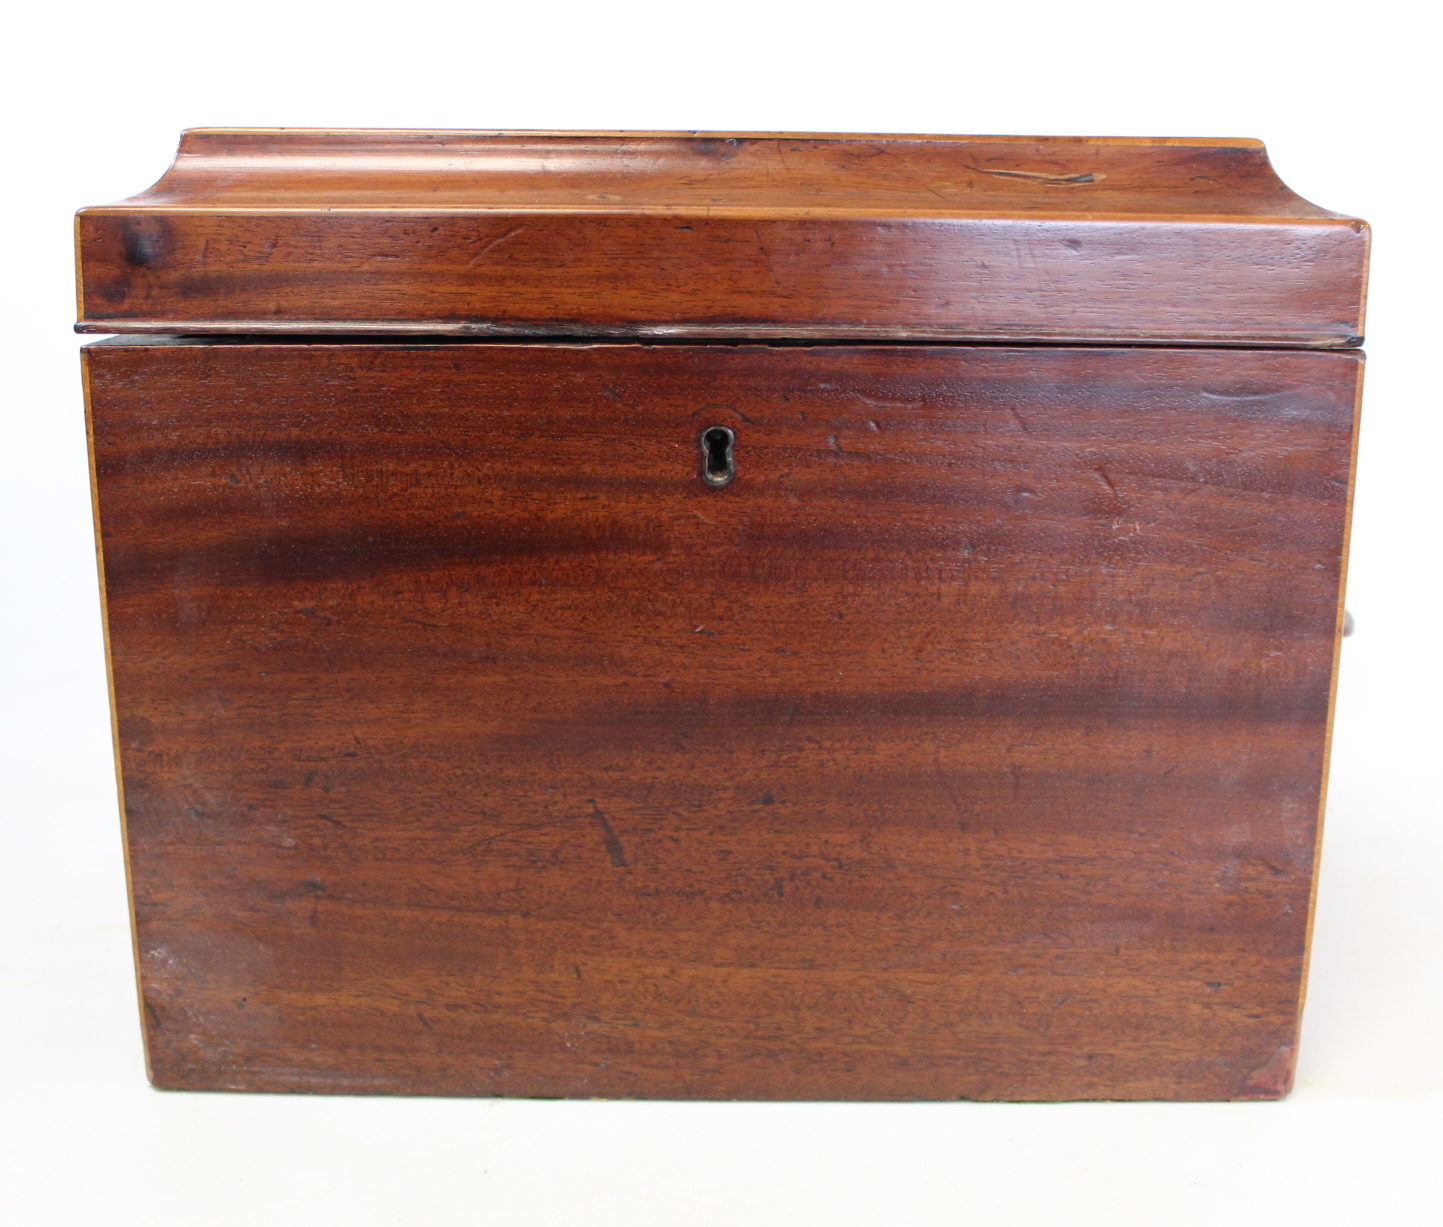 19th century travelling decanter set, the rectangular mahogany box with twin brass carrying handles, - Image 6 of 12